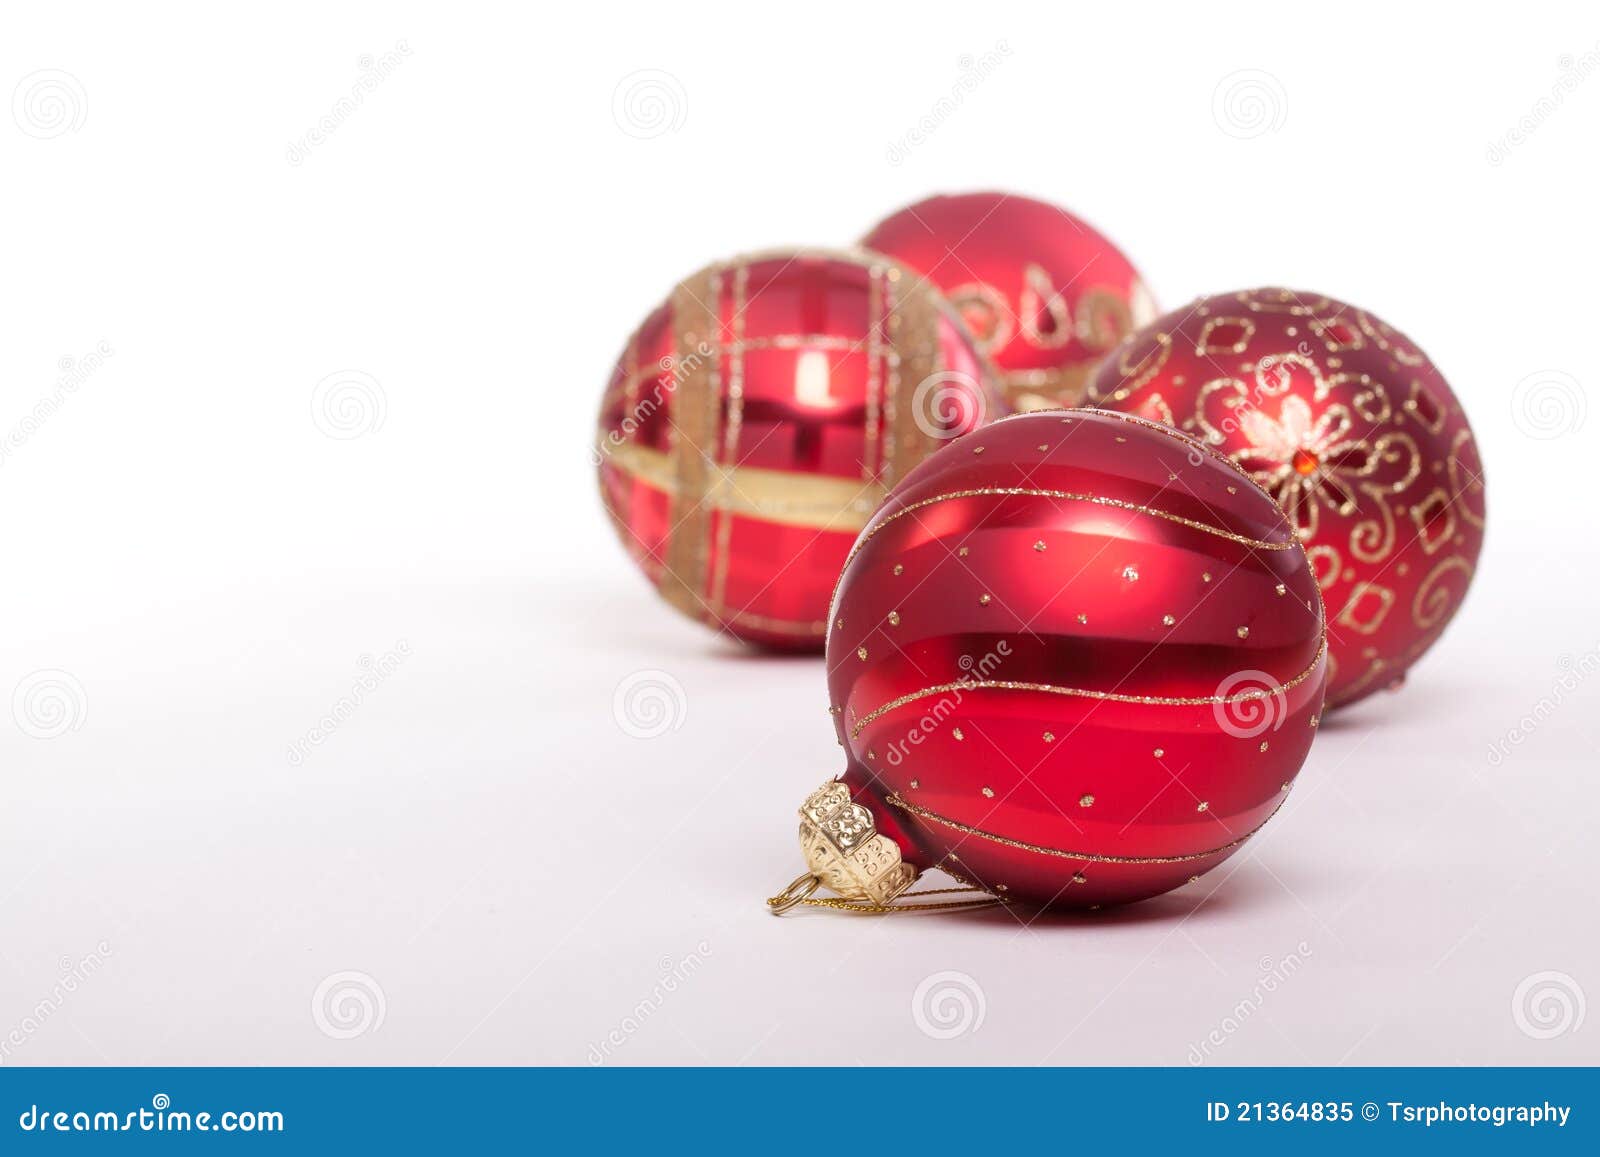 Red and Gold Christmas Baubles Stock Image - Image of december ...